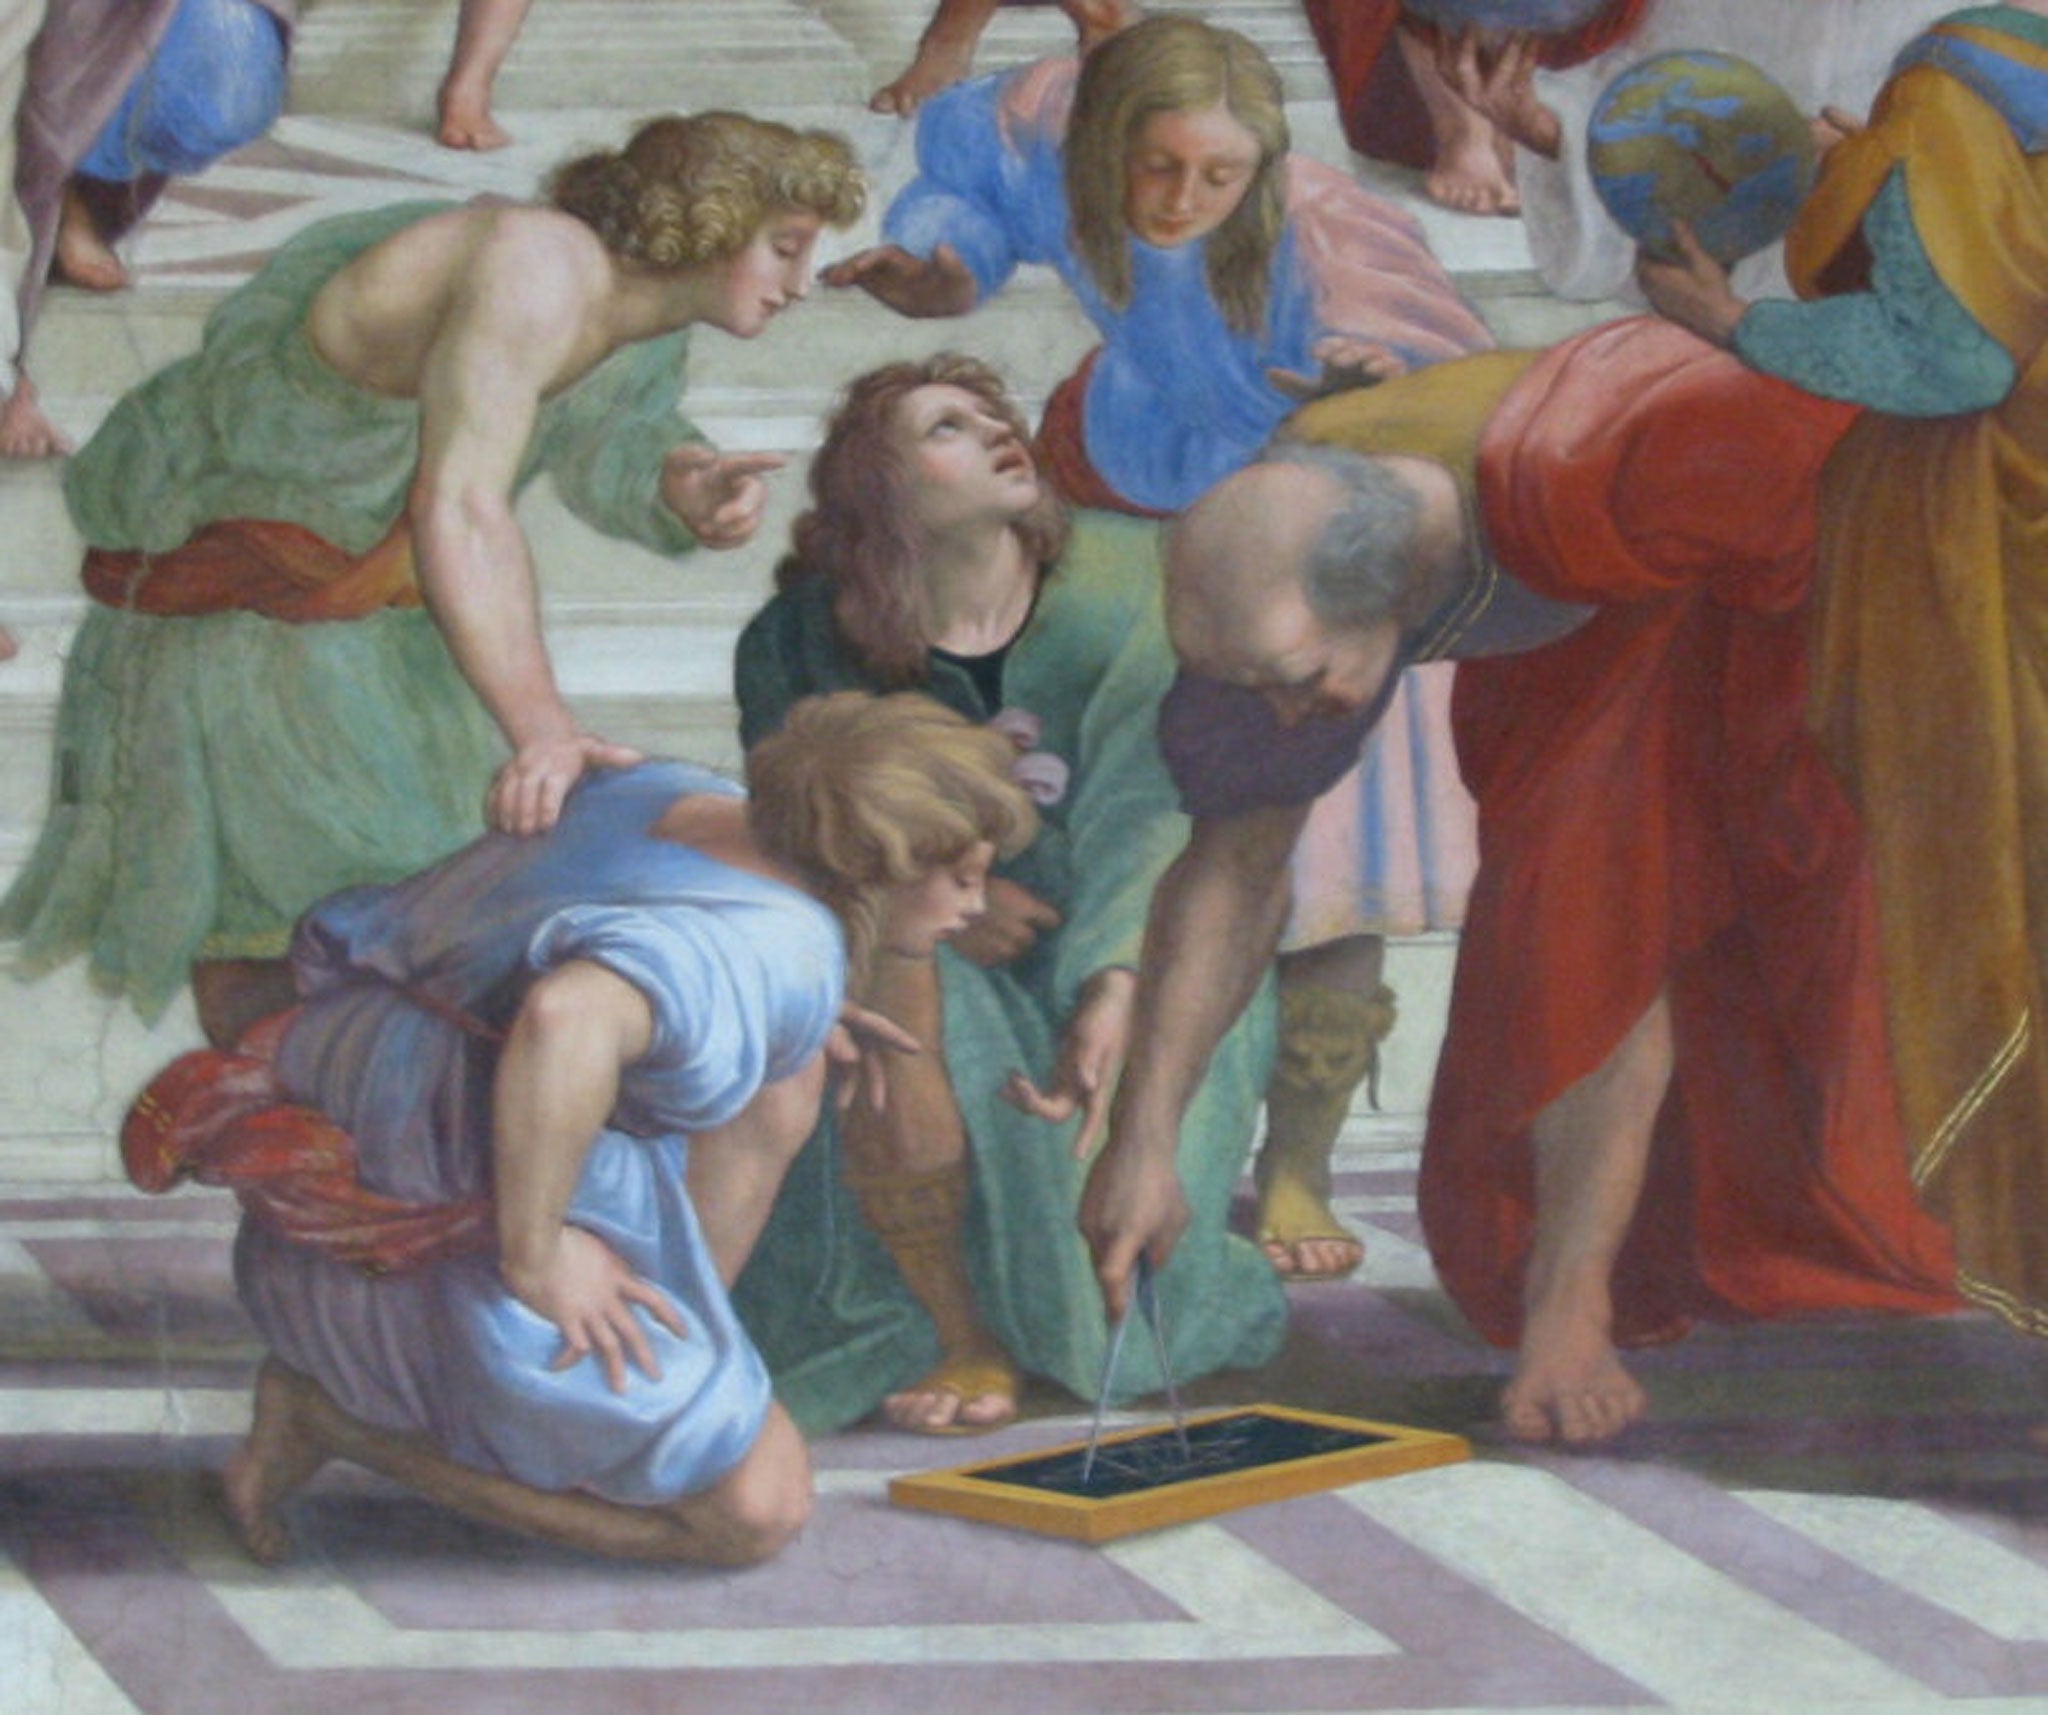 Euclid, Greek mathematician, 3rd century BC, as imagined by Raphael in this detail from The School of Athens